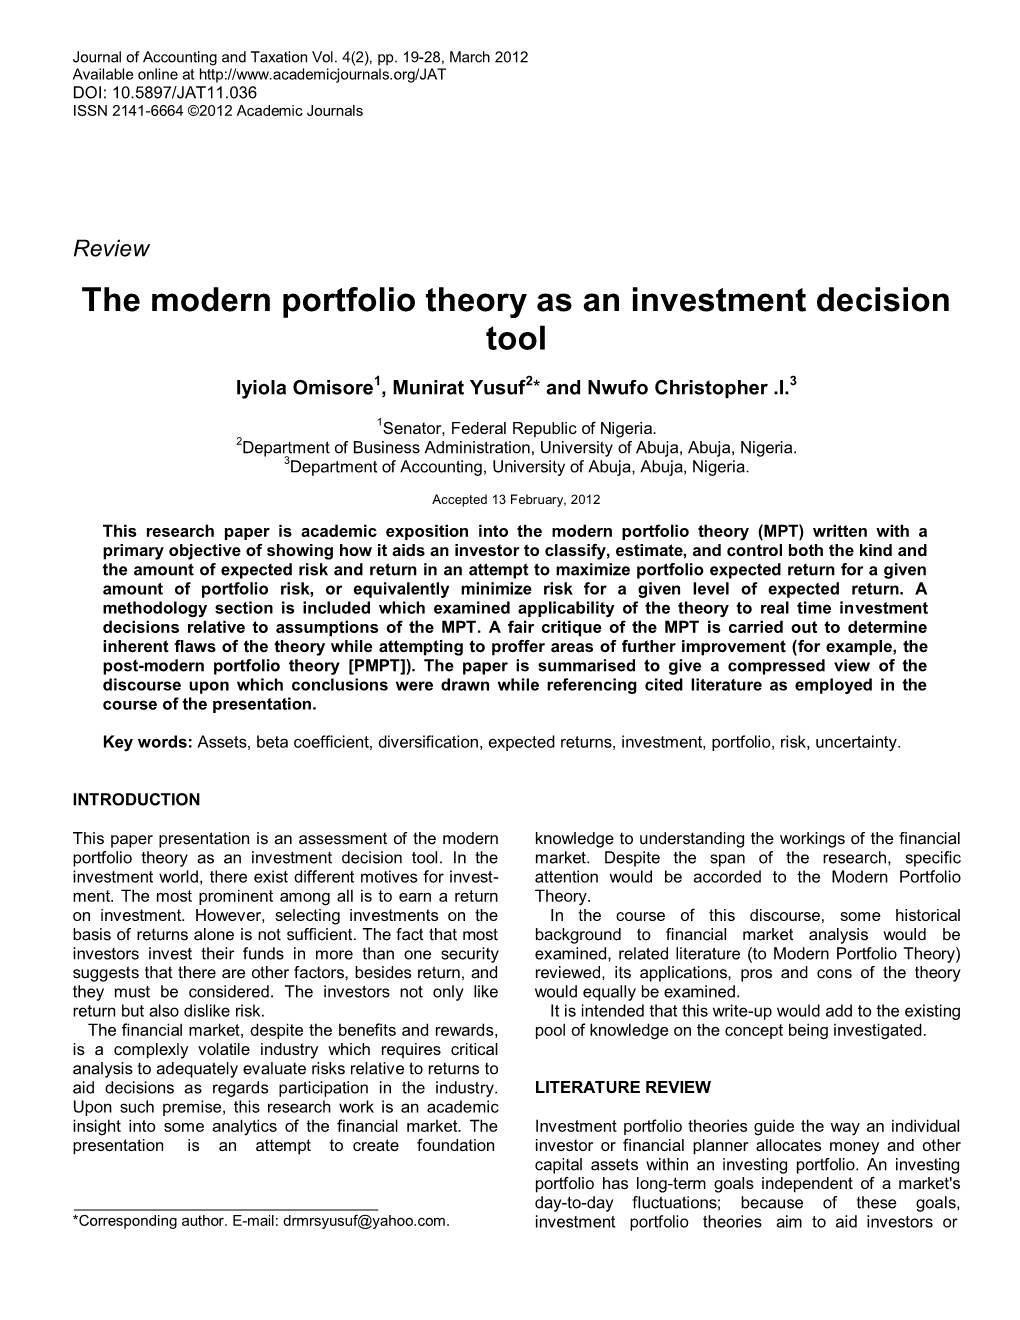 The Modern Portfolio Theory As an Investment Decision Tool